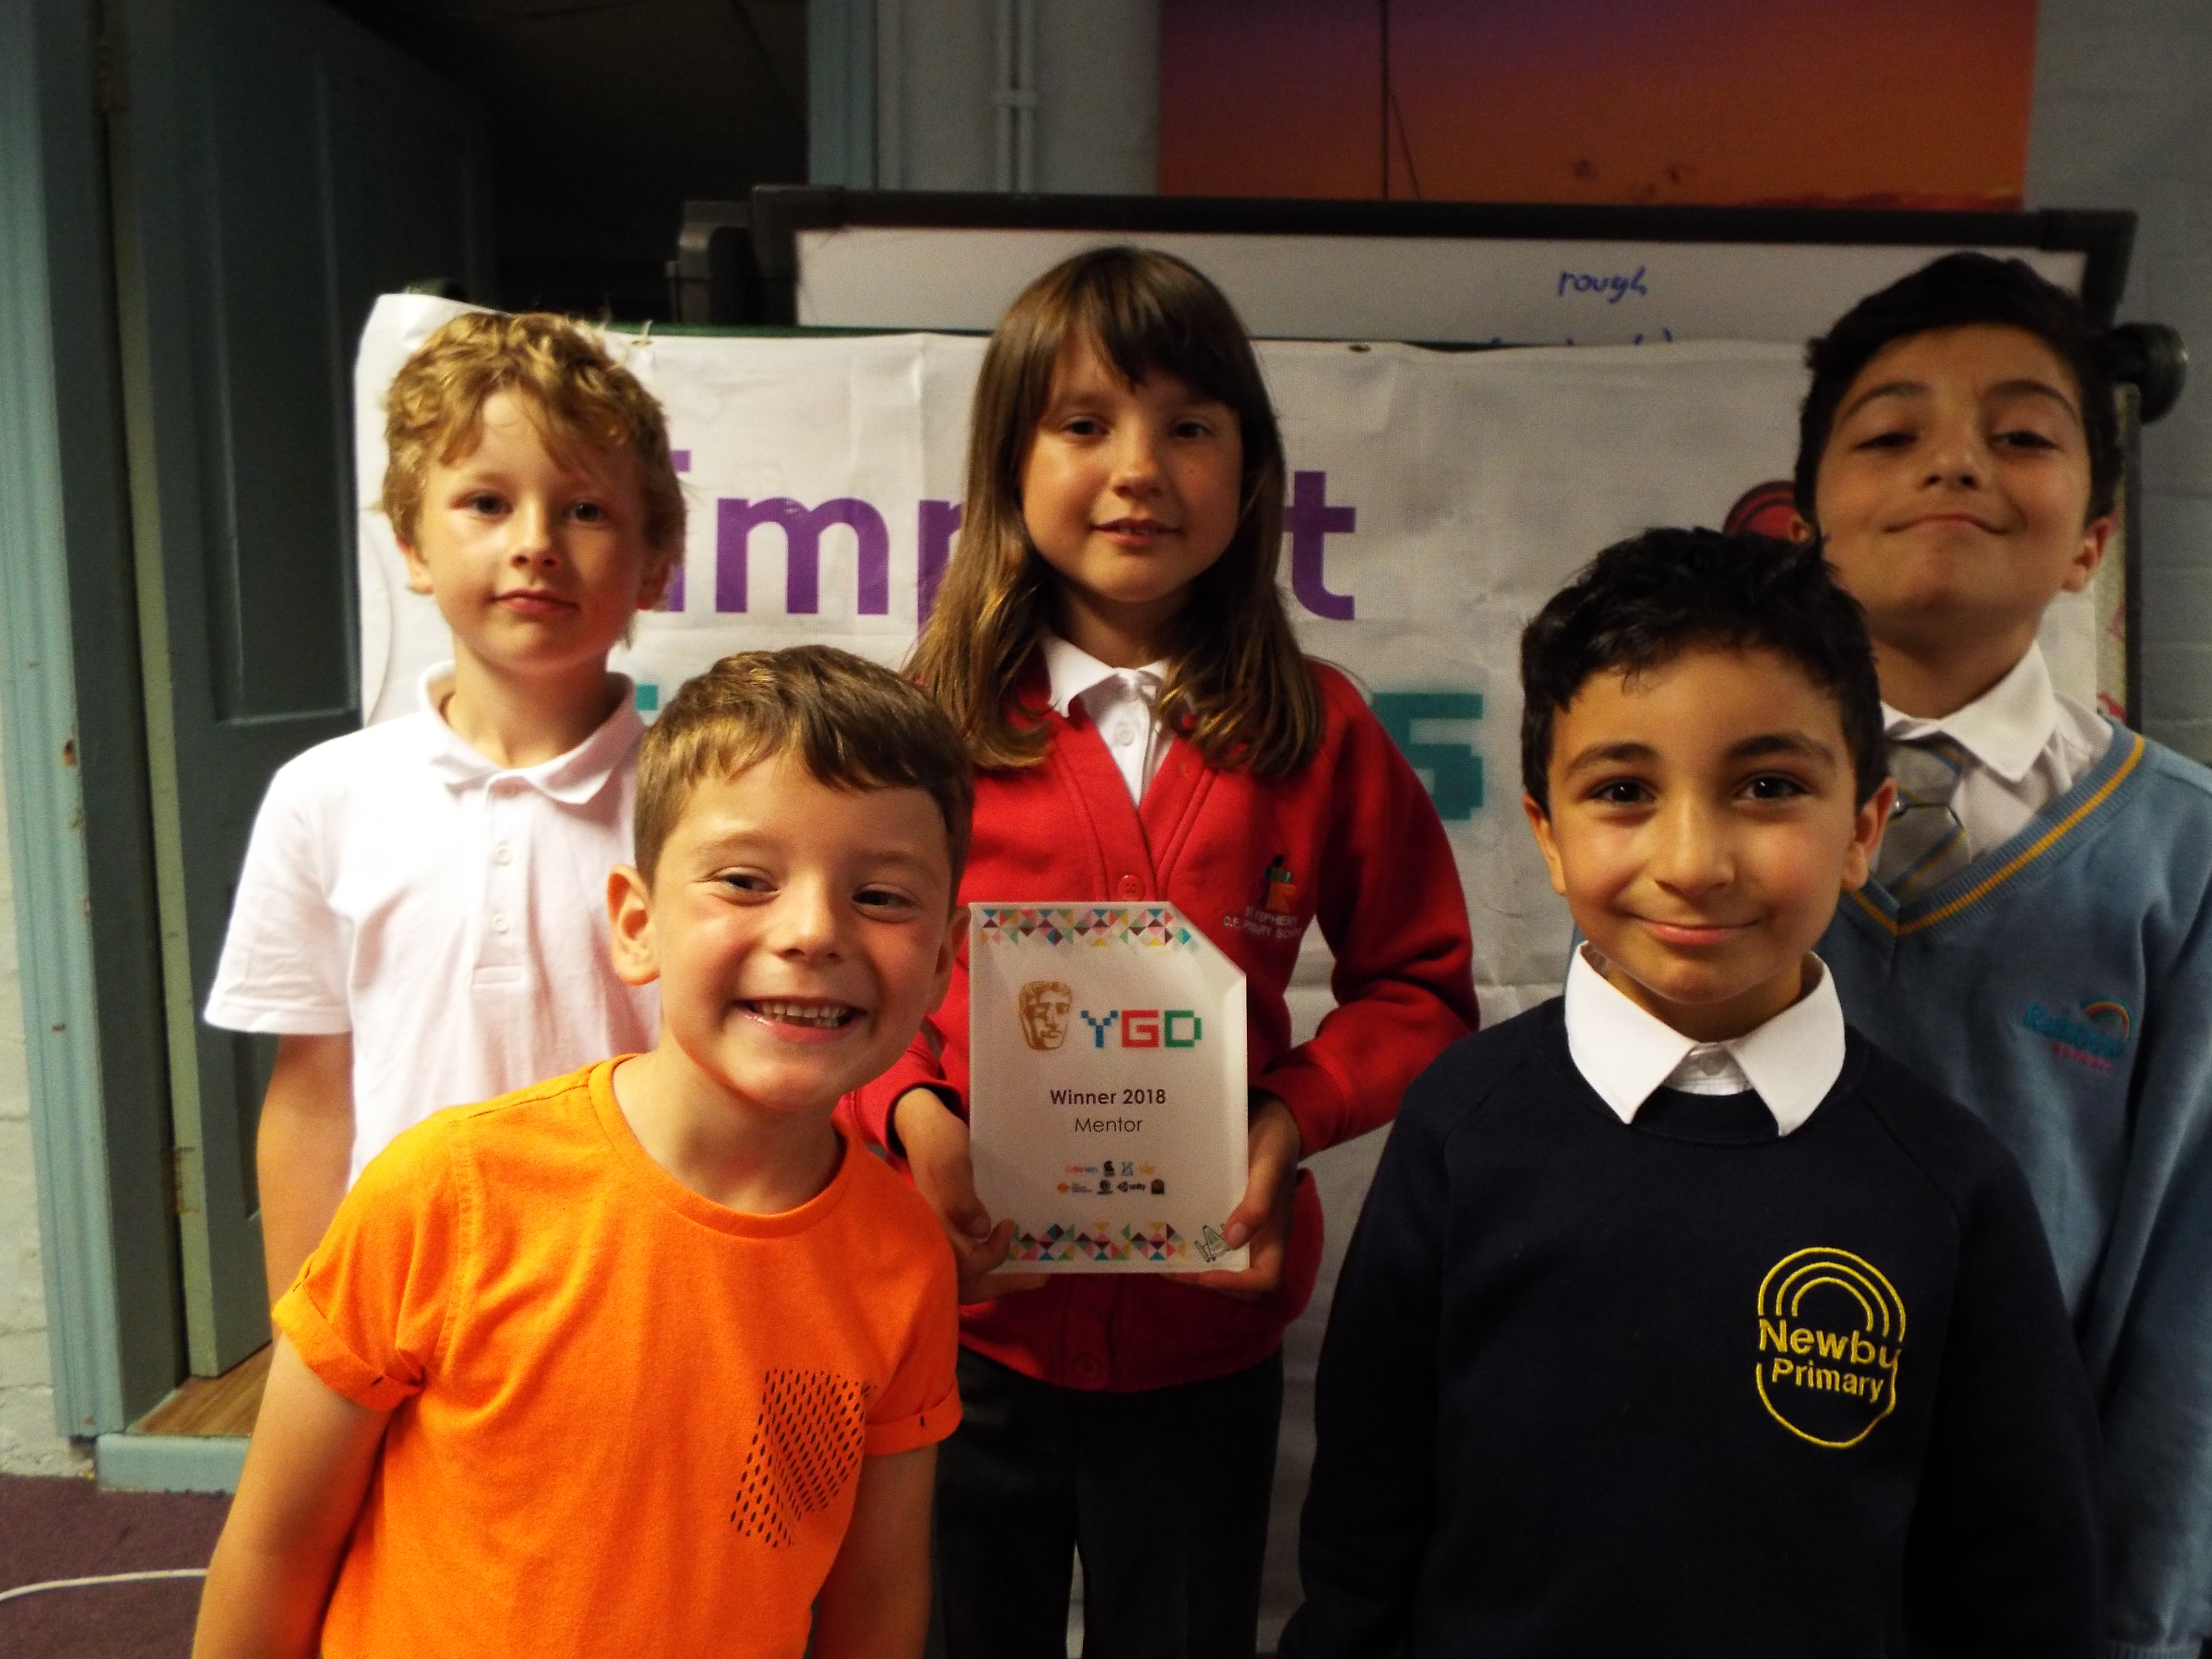 Children at Impact Gamers holding the 2018 BAFTA Young Game Designers Mentor Award